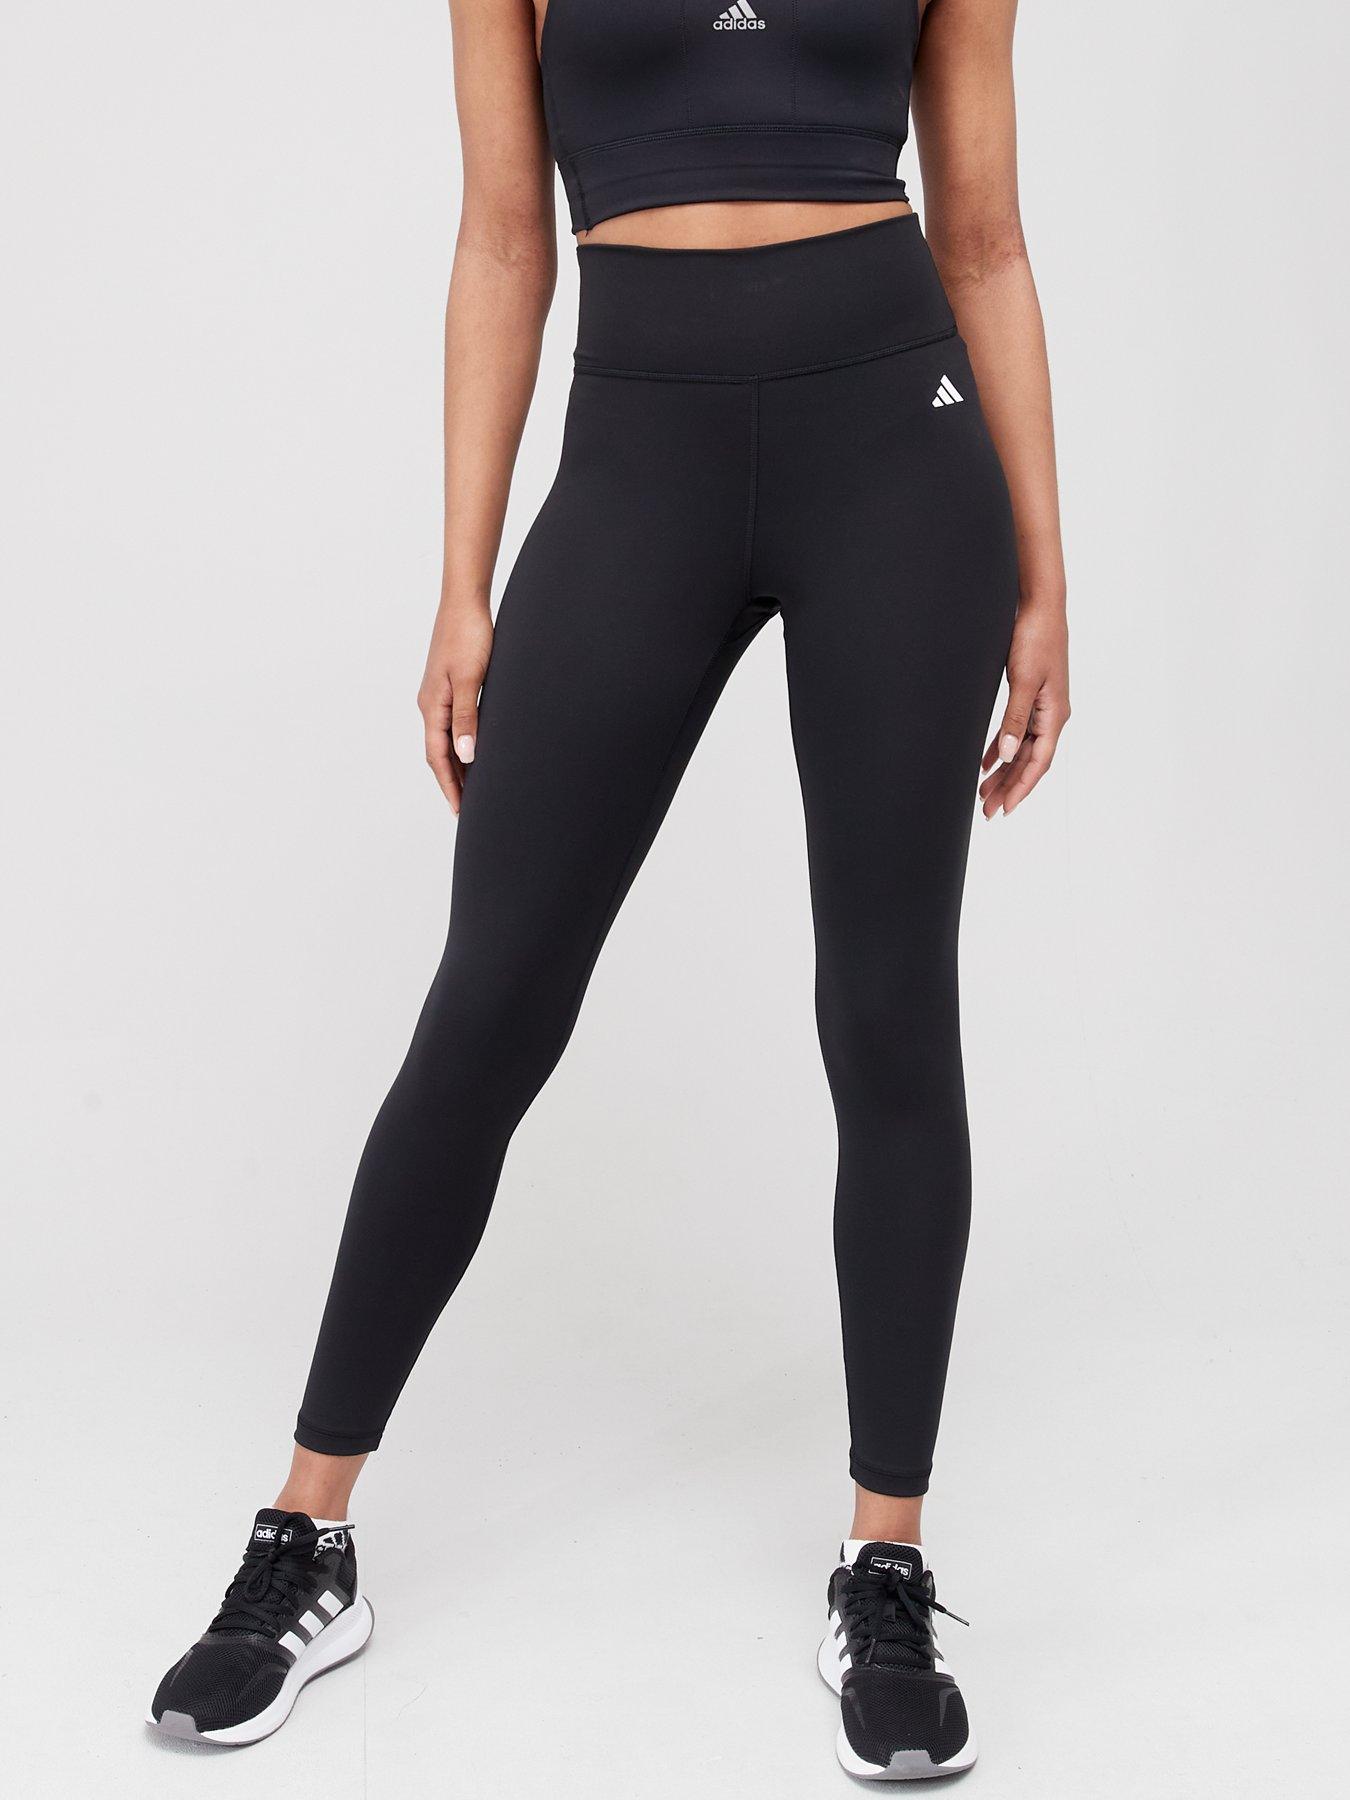 Women's Tech-Fit Long Compression Tights - Black